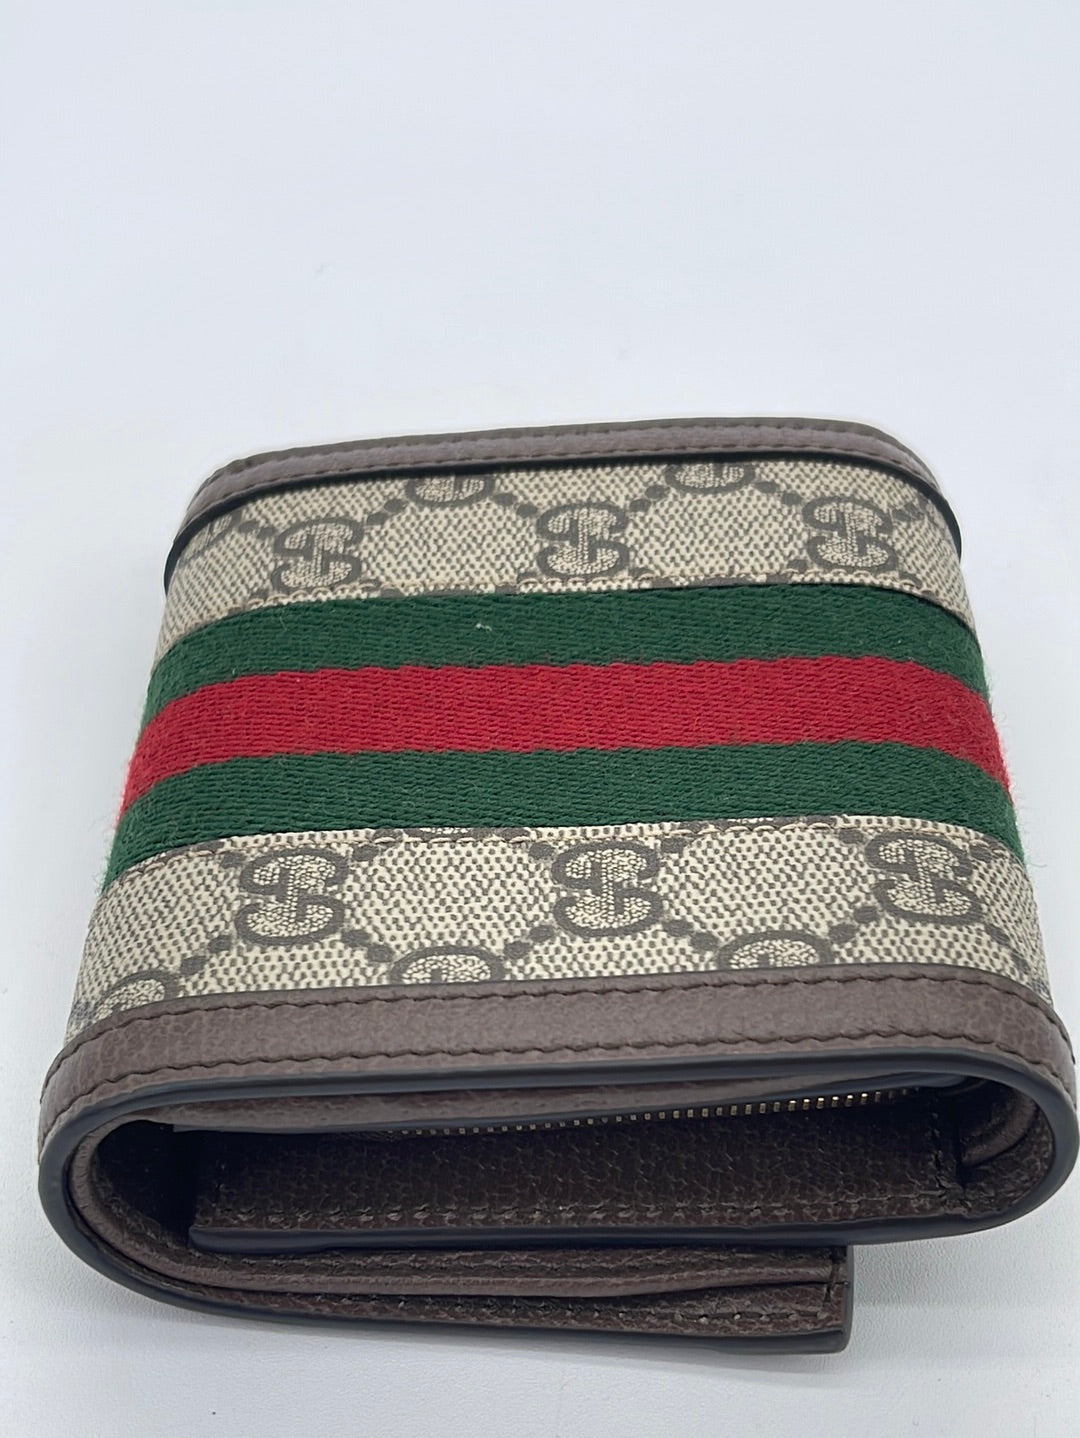 Preloved Gucci Supreme GG Ophidia Card Case Wallet 5986622184 052323